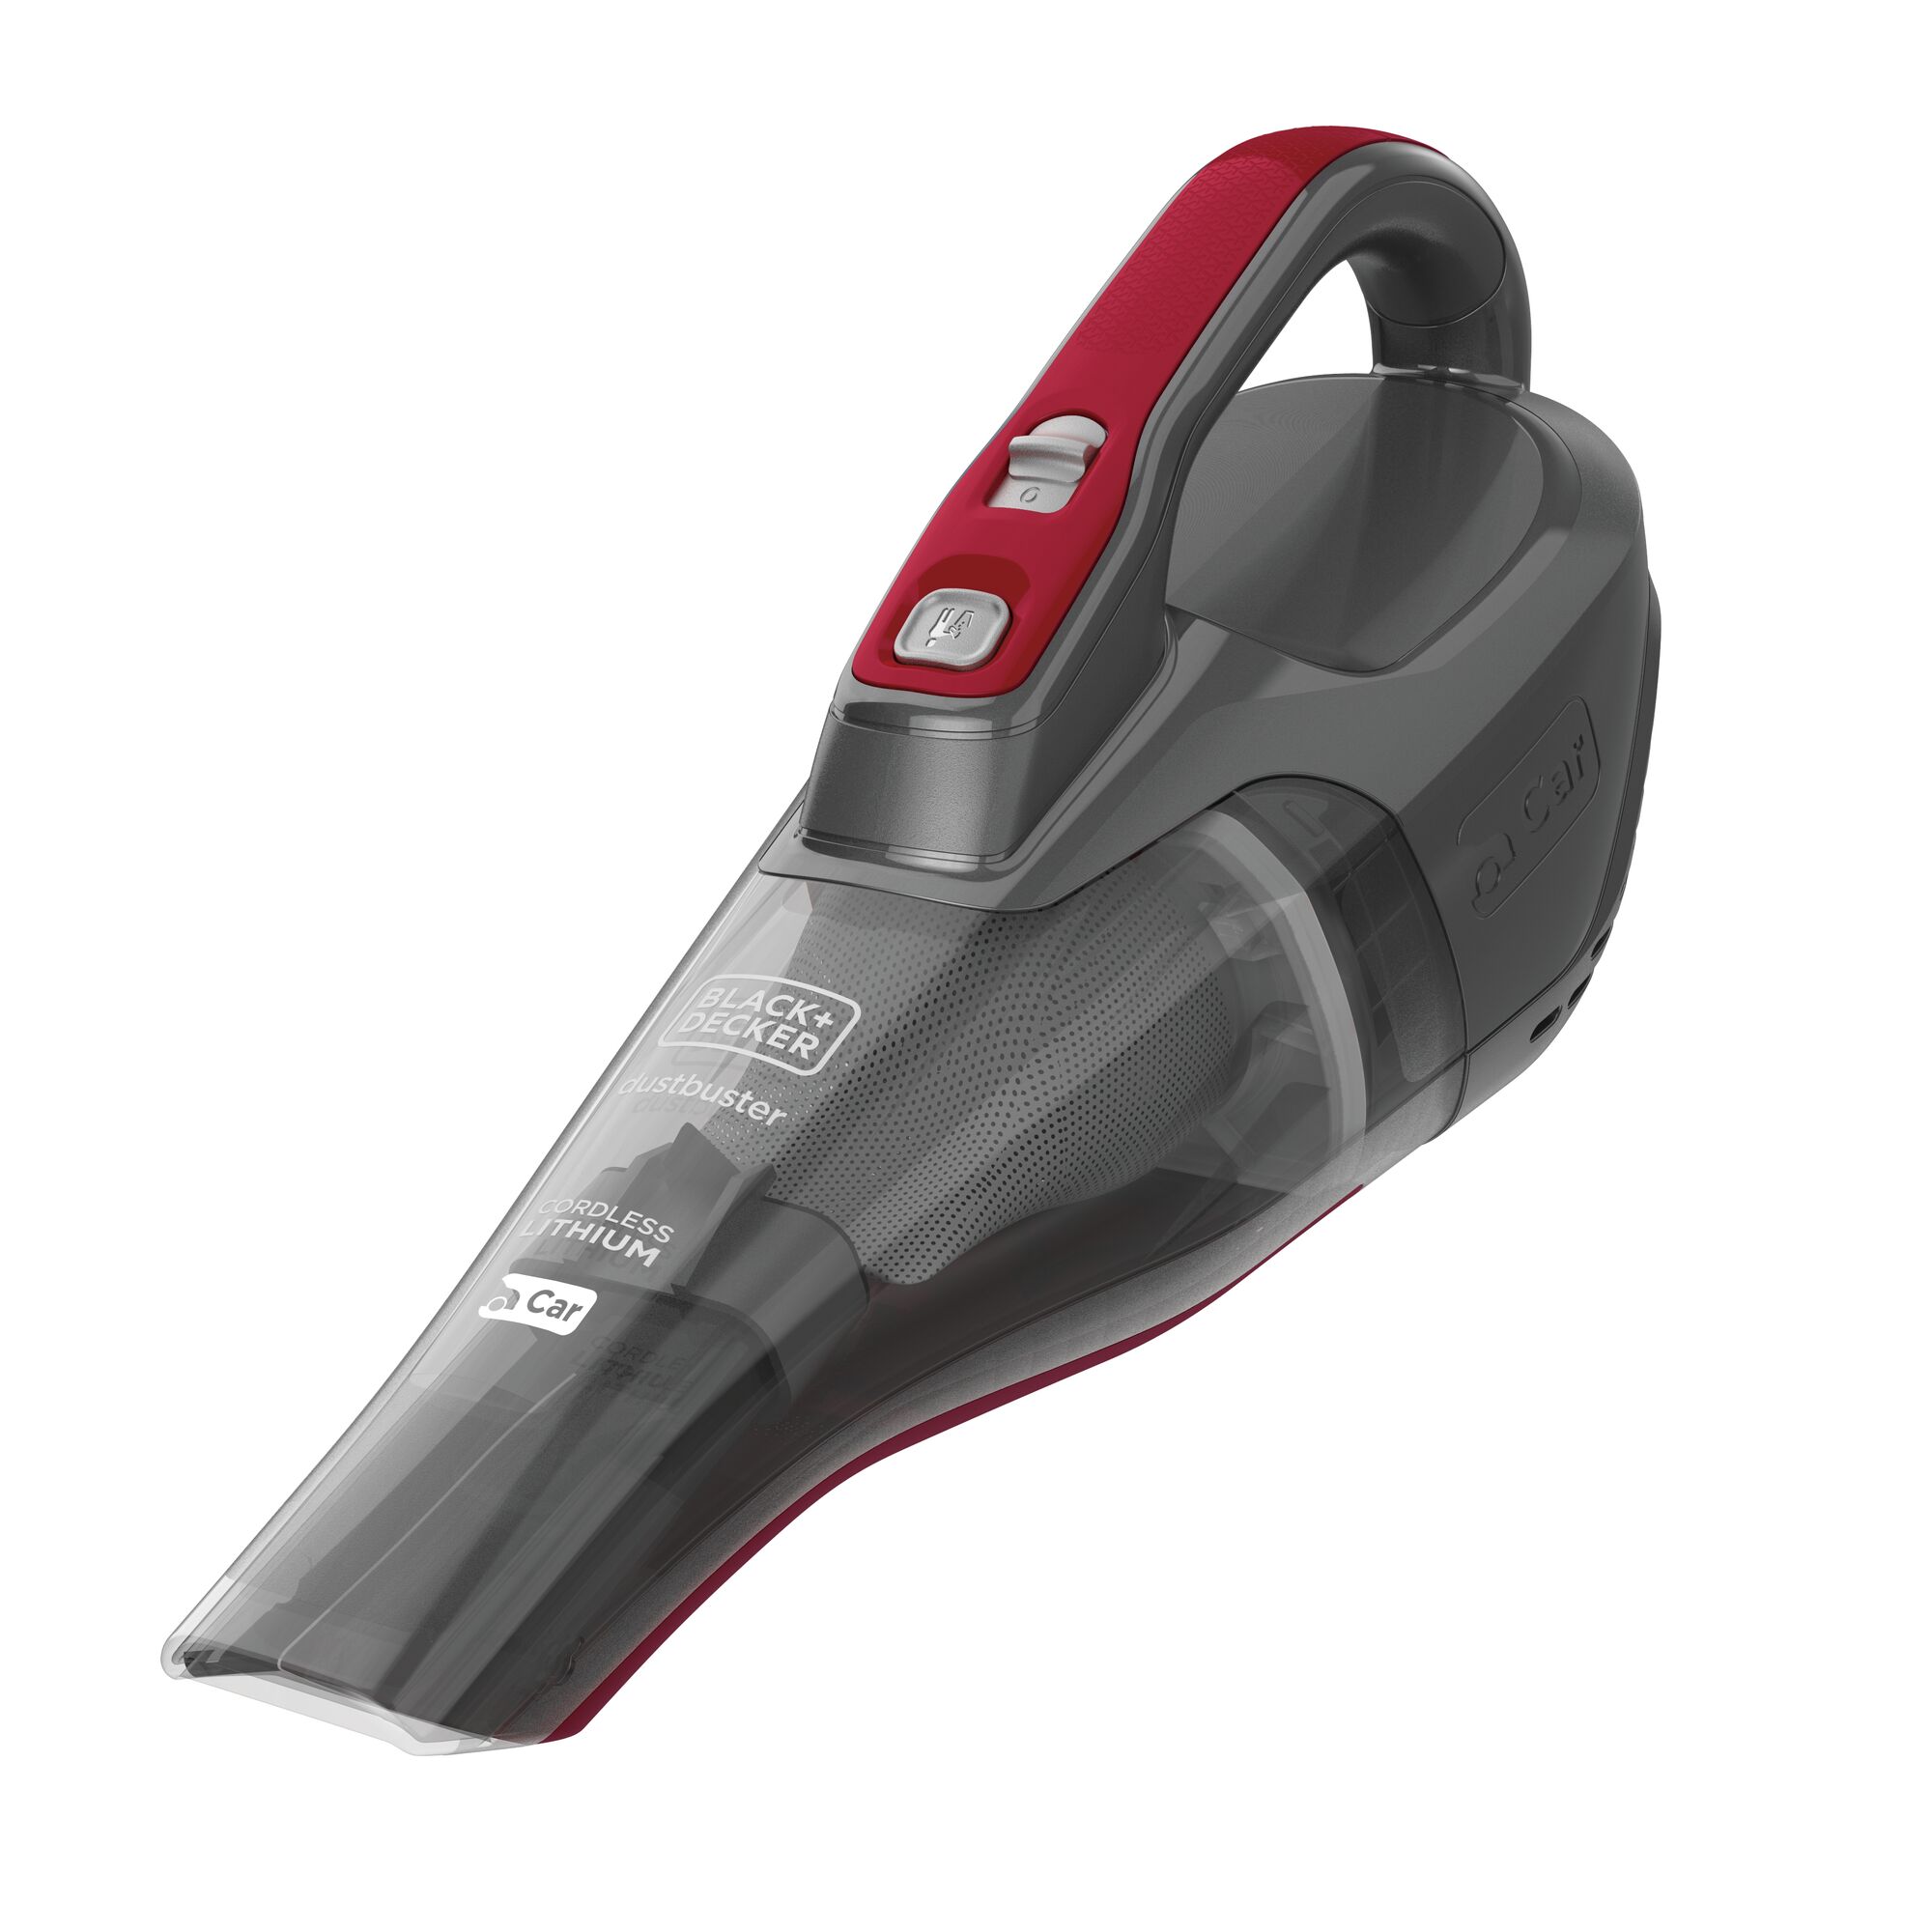 Dustbuster Quick Clean Car Cordless Hand Vacuum With Motorized Upholstery Brush.